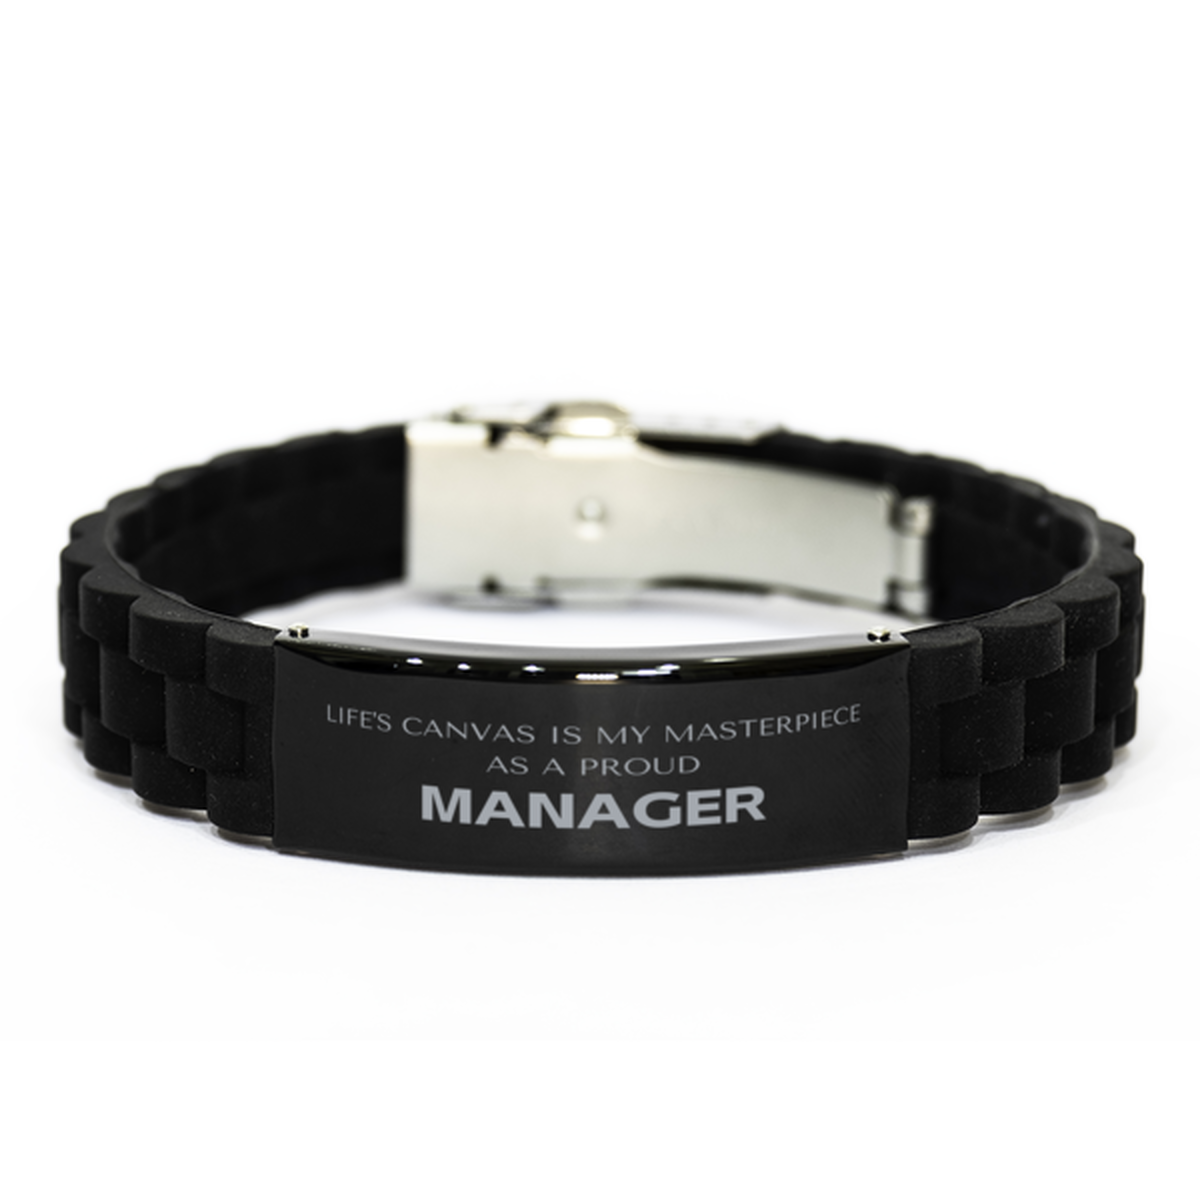 Proud Manager Gifts, Life's canvas is my masterpiece, Epic Birthday Christmas Unique Black Glidelock Clasp Bracelet For Manager, Coworkers, Men, Women, Friends